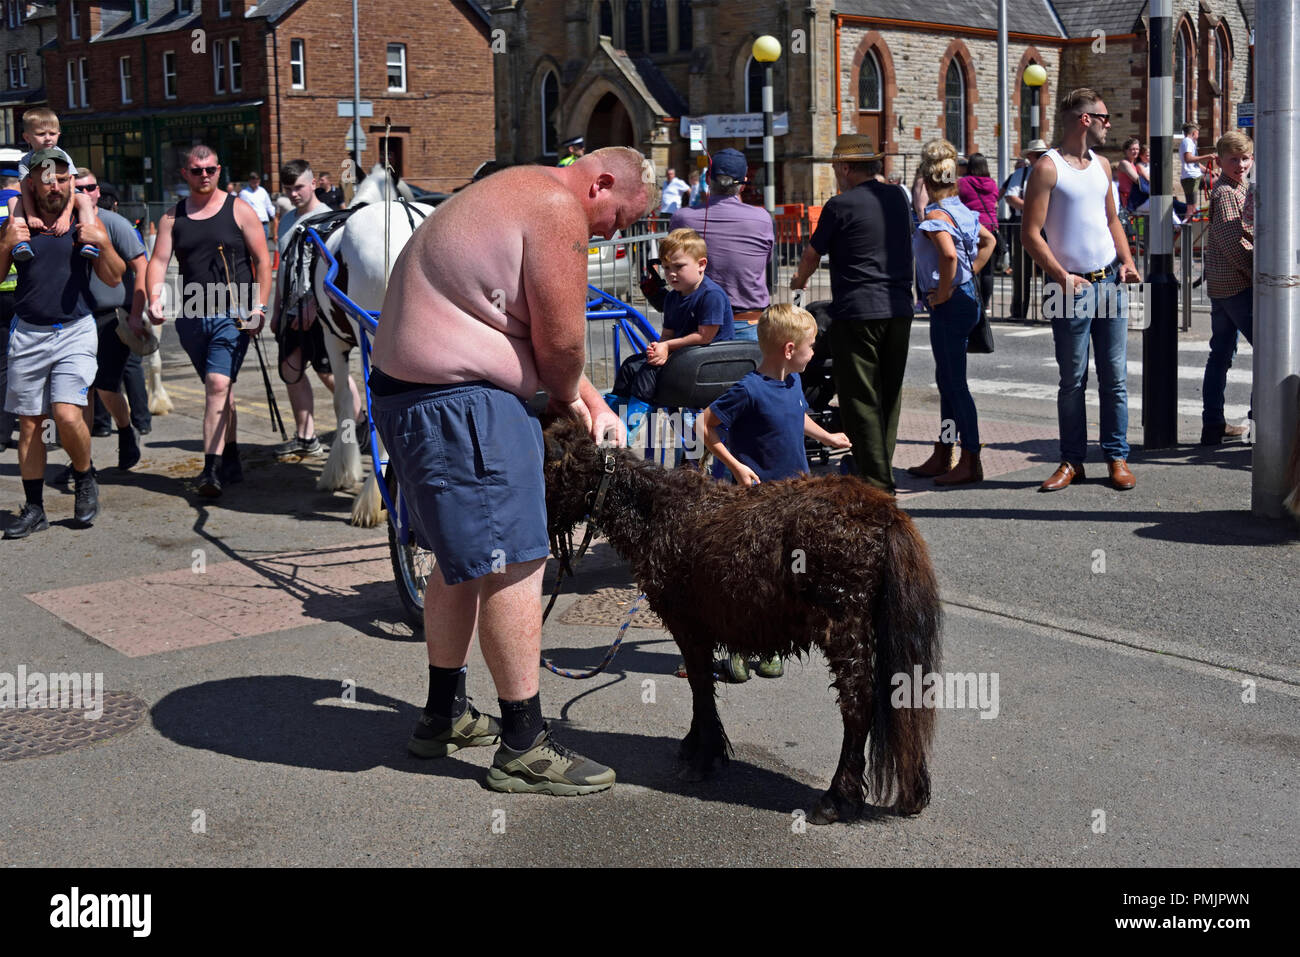 Obese Gypsy Traveller with miniature pony. Appleby Horse Fair 2018. The Sands, Appleby-in-Westmorland, Cumbria, England, United Kingdom, Europe. Stock Photo